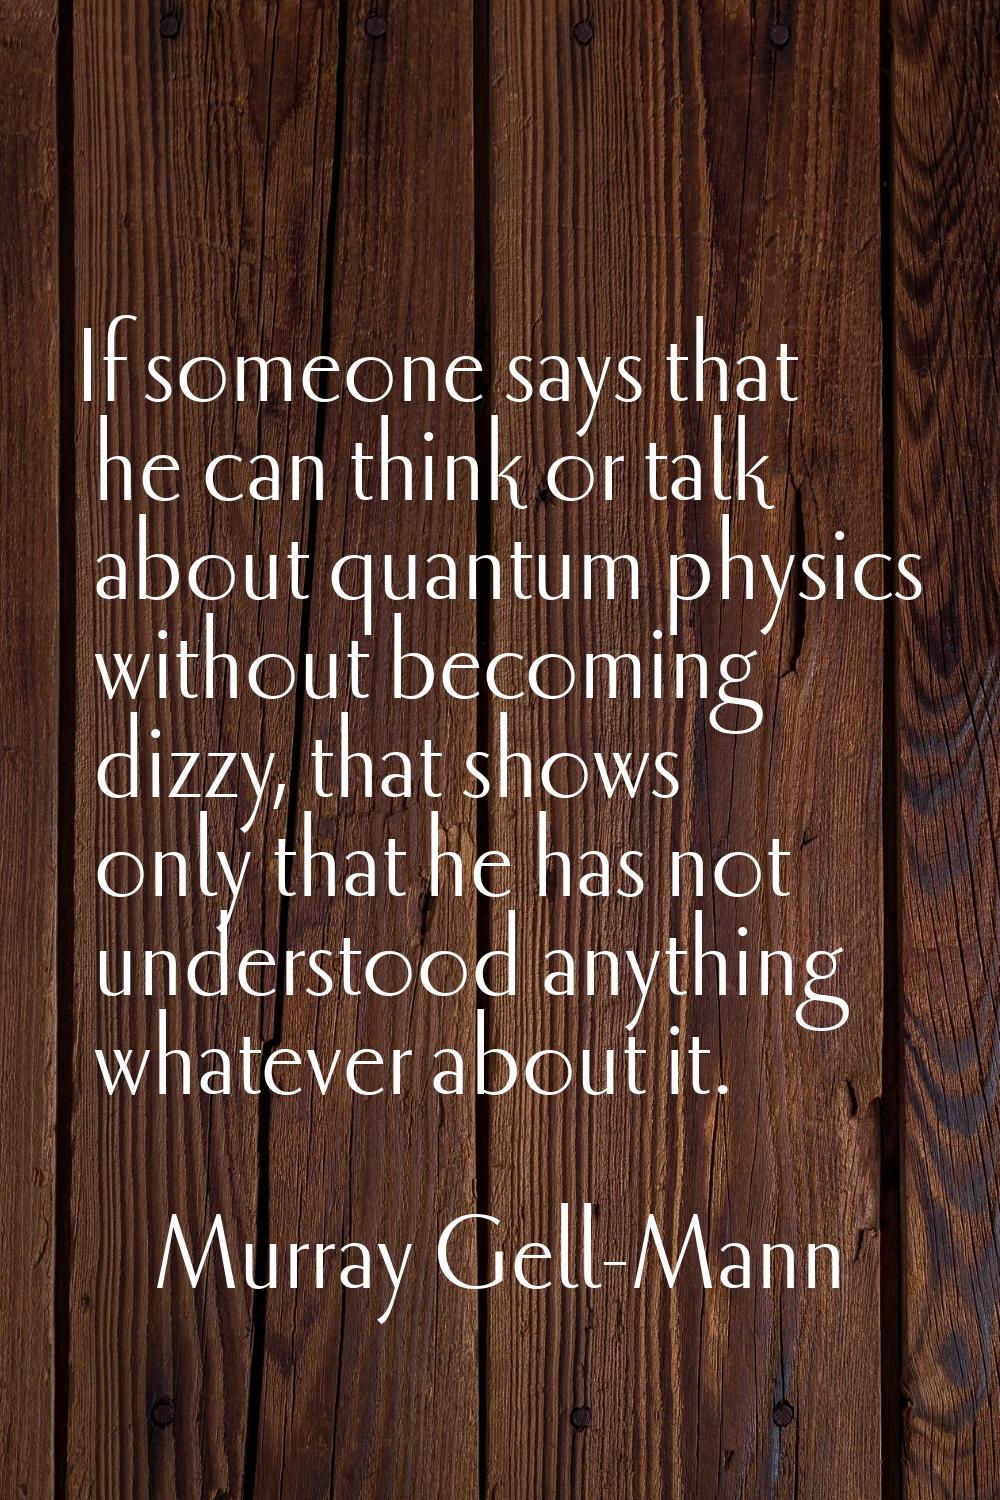 If someone says that he can think or talk about quantum physics without becoming dizzy, that shows 